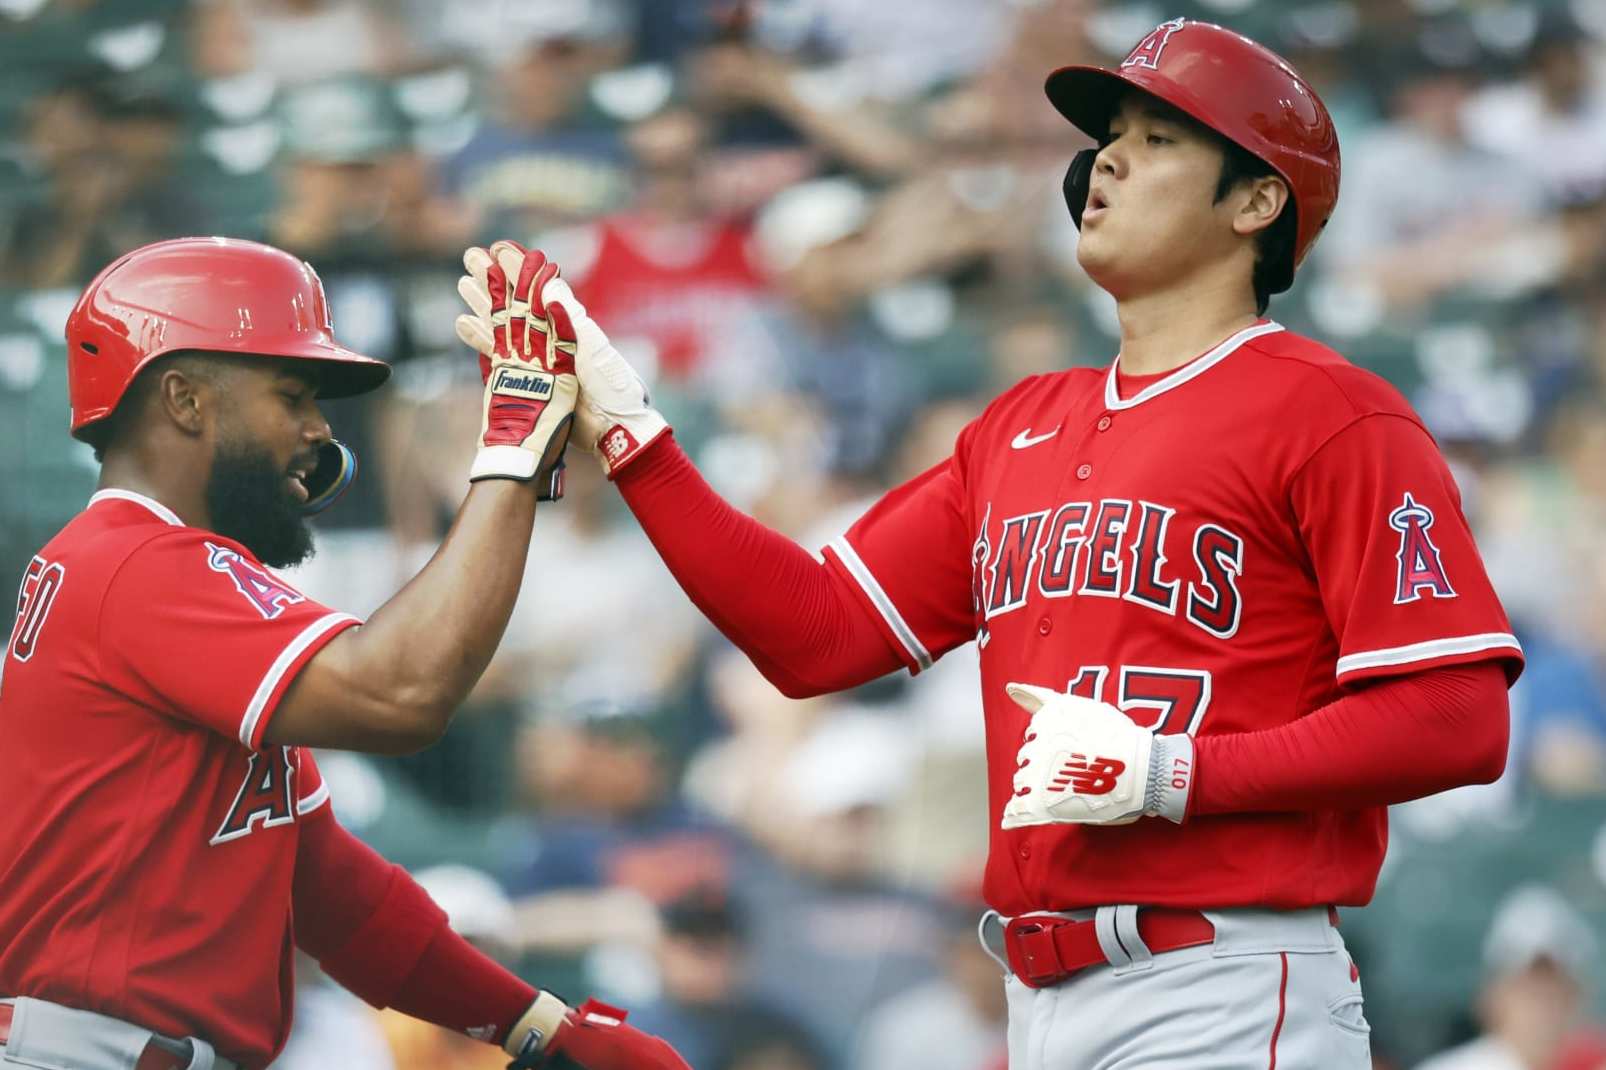 Trout, Angels shut down by White Sox; Ohtani pinch hits